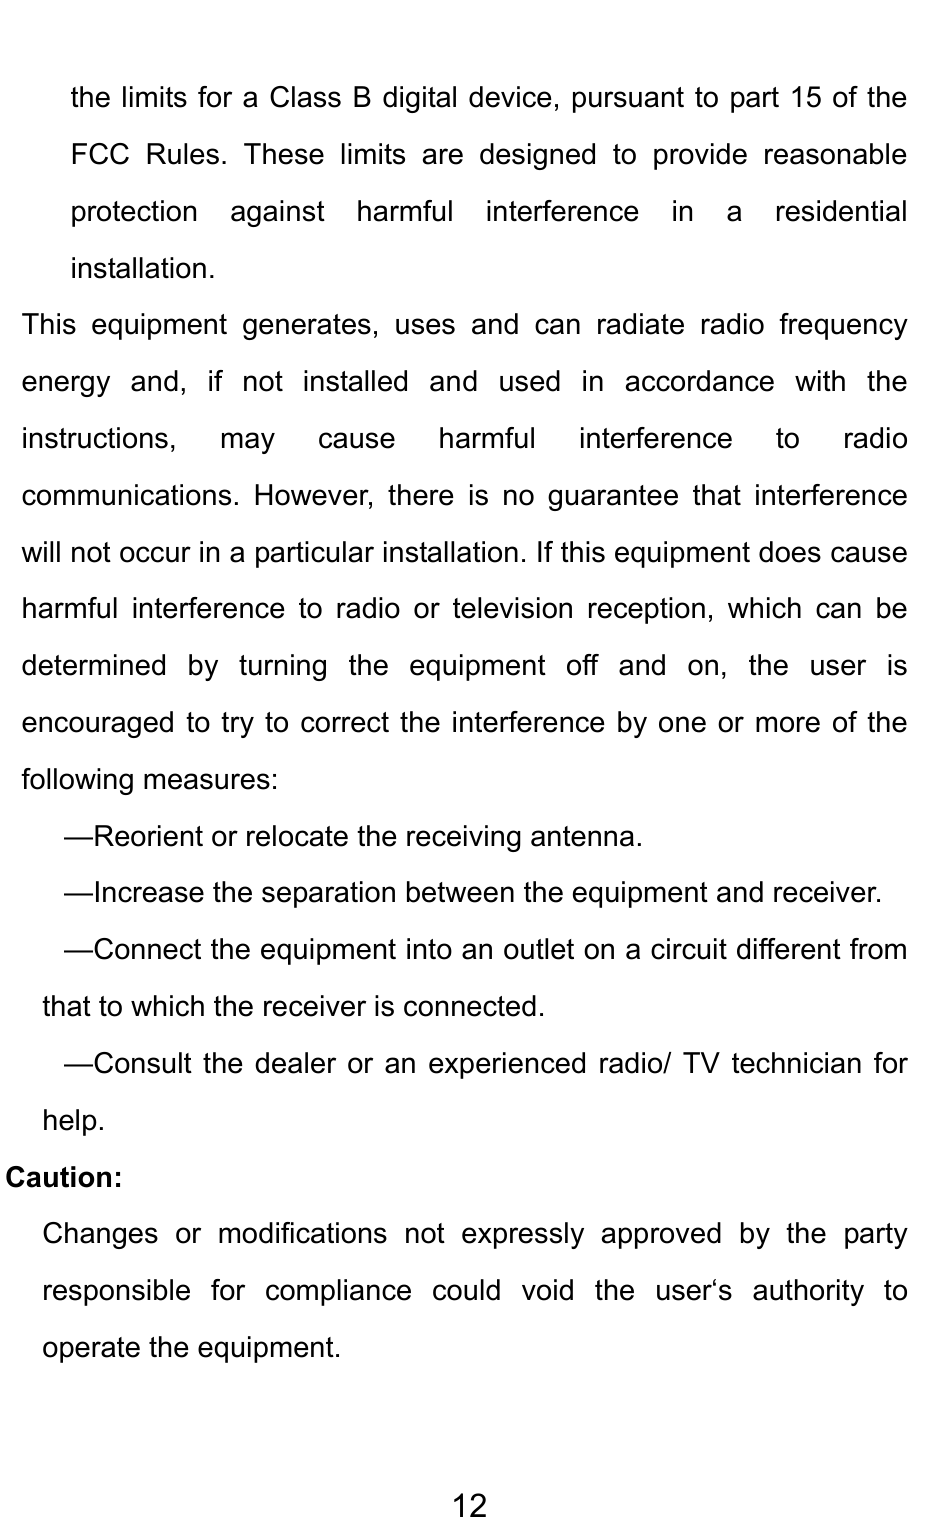                                     12the limits for a Class B digital device, pursuant to part 15 of the FCC Rules. These limits are designed to provide reasonable protection against harmful interference in a residential installation.  This equipment generates, uses and can radiate radio frequency energy and, if not installed and used in accordance with the instructions, may cause harmful interference to radio communications. However, there is no guarantee that interference will not occur in a particular installation. If this equipment does cause harmful interference to radio or television reception, which can be determined by turning the equipment off and on, the user is encouraged to try to correct the interference by one or more of the following measures: —Reorient or relocate the receiving antenna. —Increase the separation between the equipment and receiver. —Connect the equipment into an outlet on a circuit different from that to which the receiver is connected. —Consult the dealer or an experienced radio/ TV technician for help. Caution: Changes or modifications not expressly approved by the party responsible for compliance could void the user‘s authority to operate the equipment.  